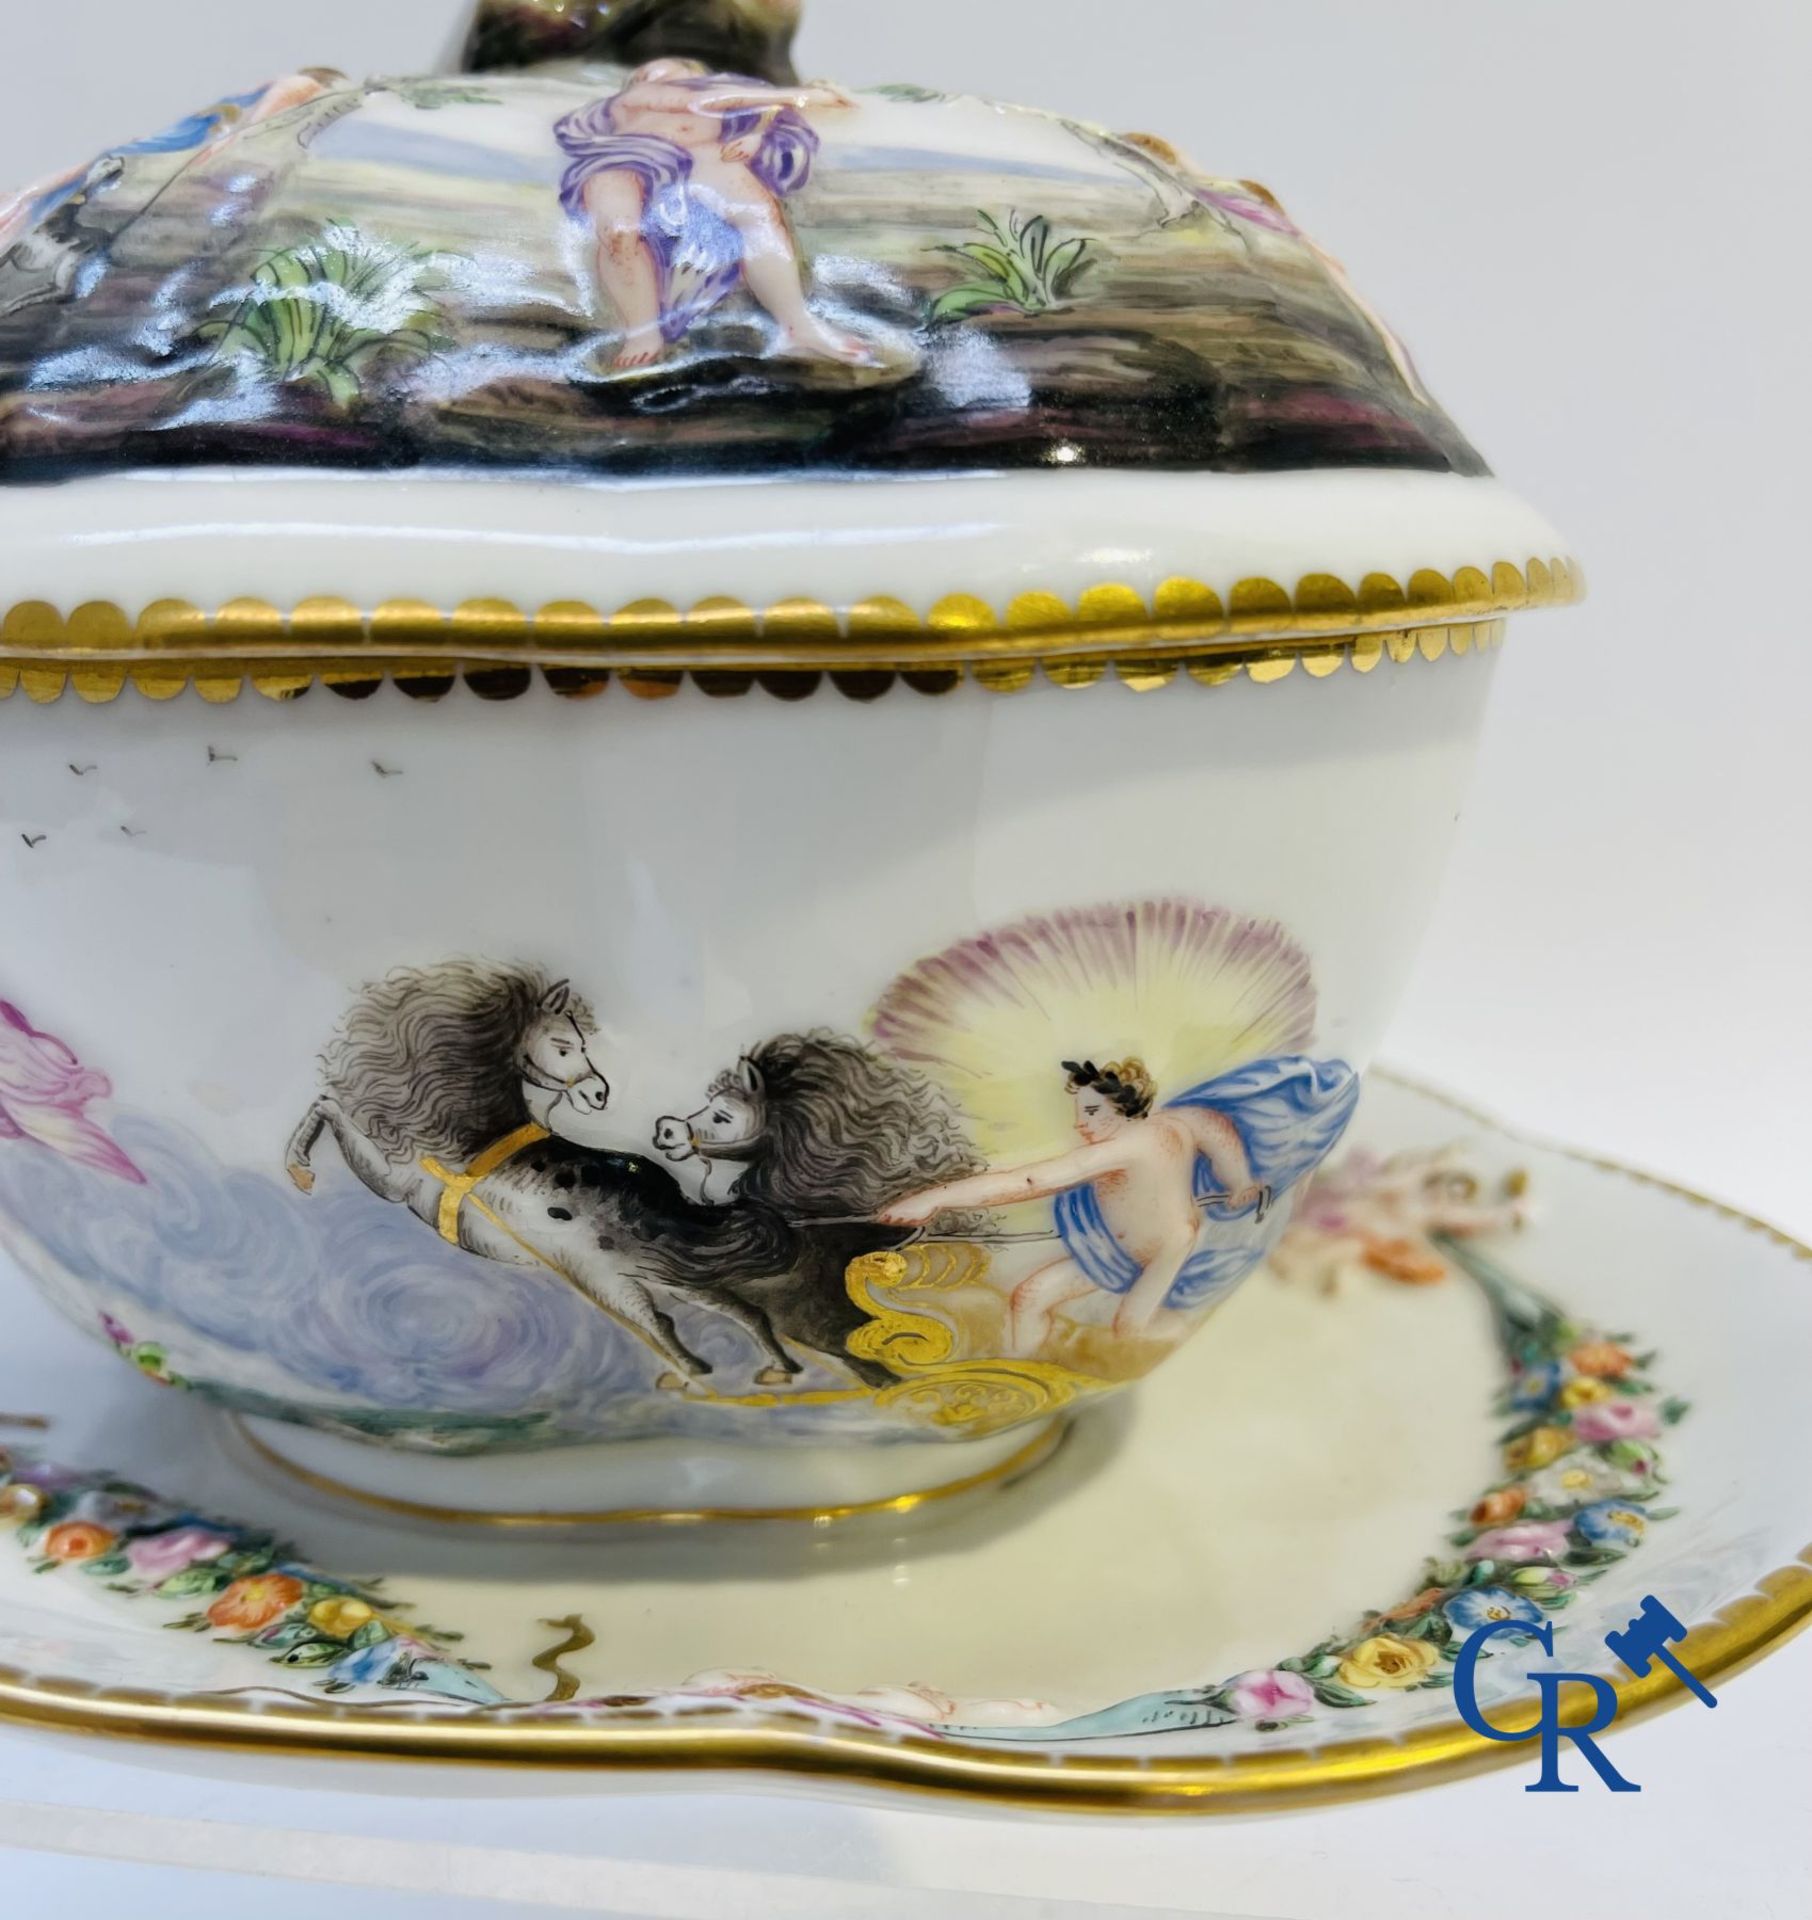 Porcelain: 2 pieces of fine porcelain with mythological scenes. 19th century. - Image 2 of 12